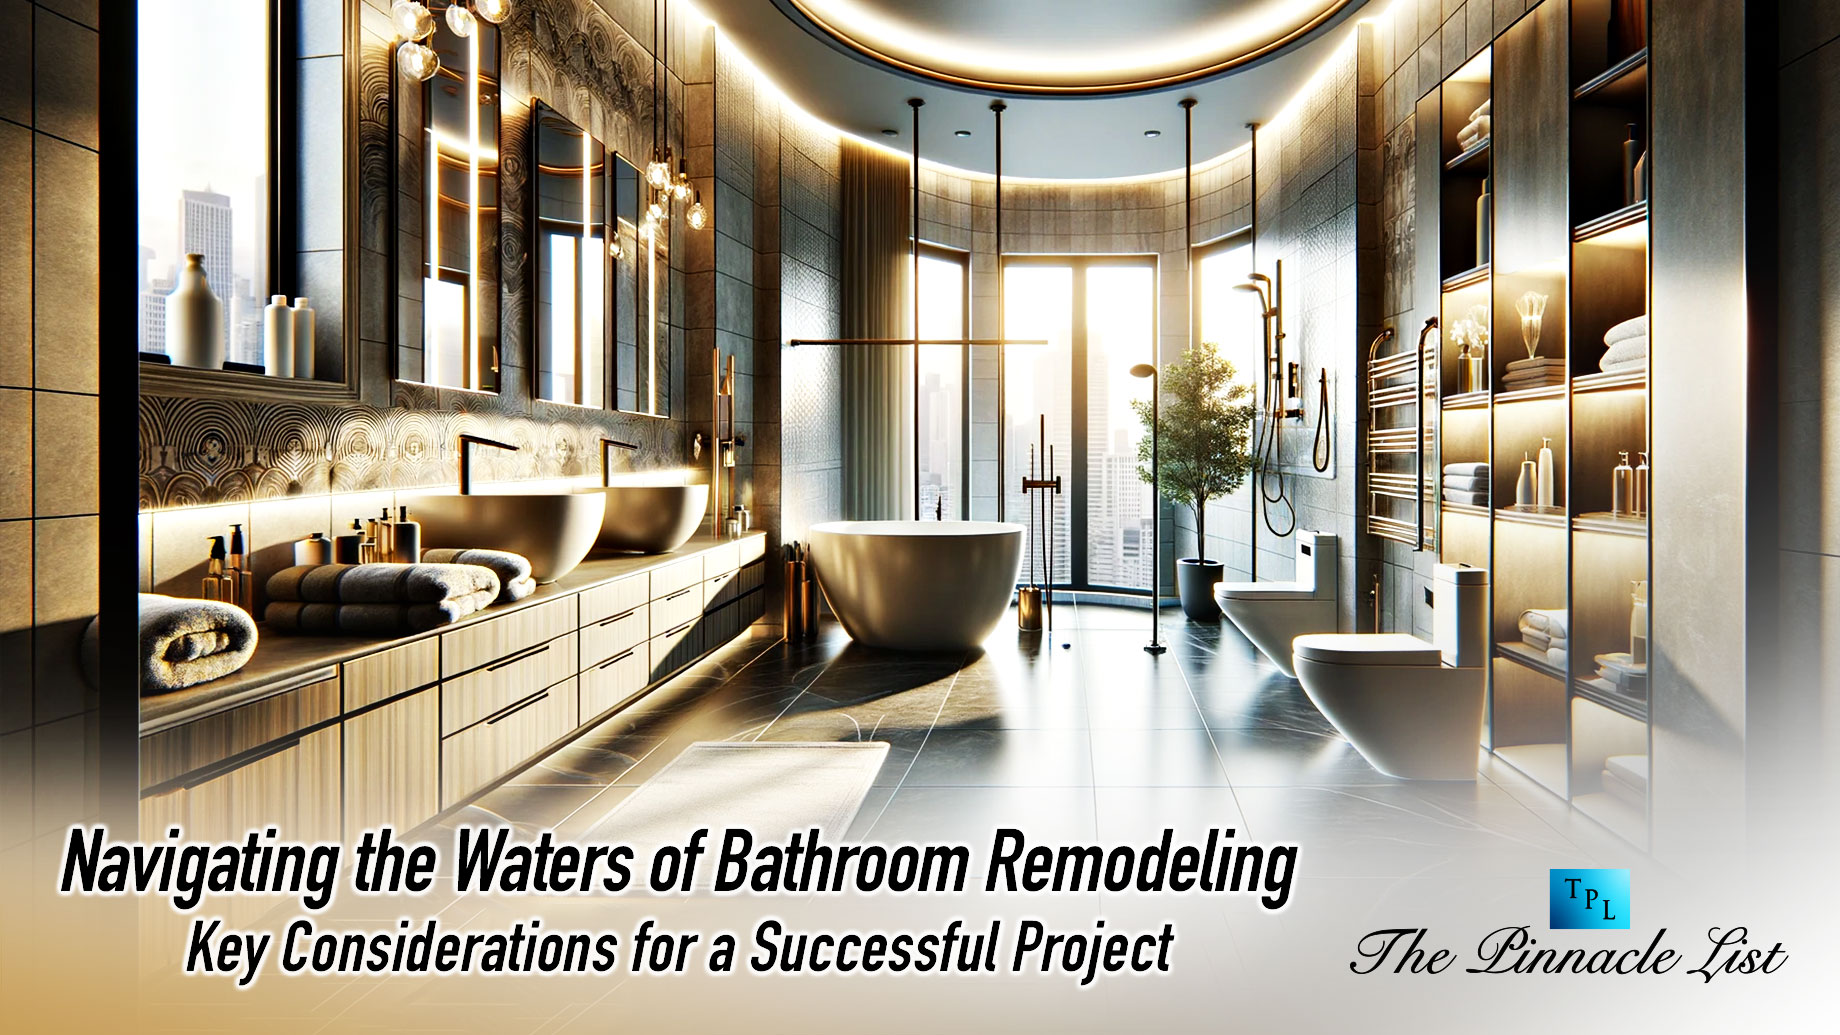 Navigating the Waters of Bathroom Remodeling: Key Considerations for a Successful Project